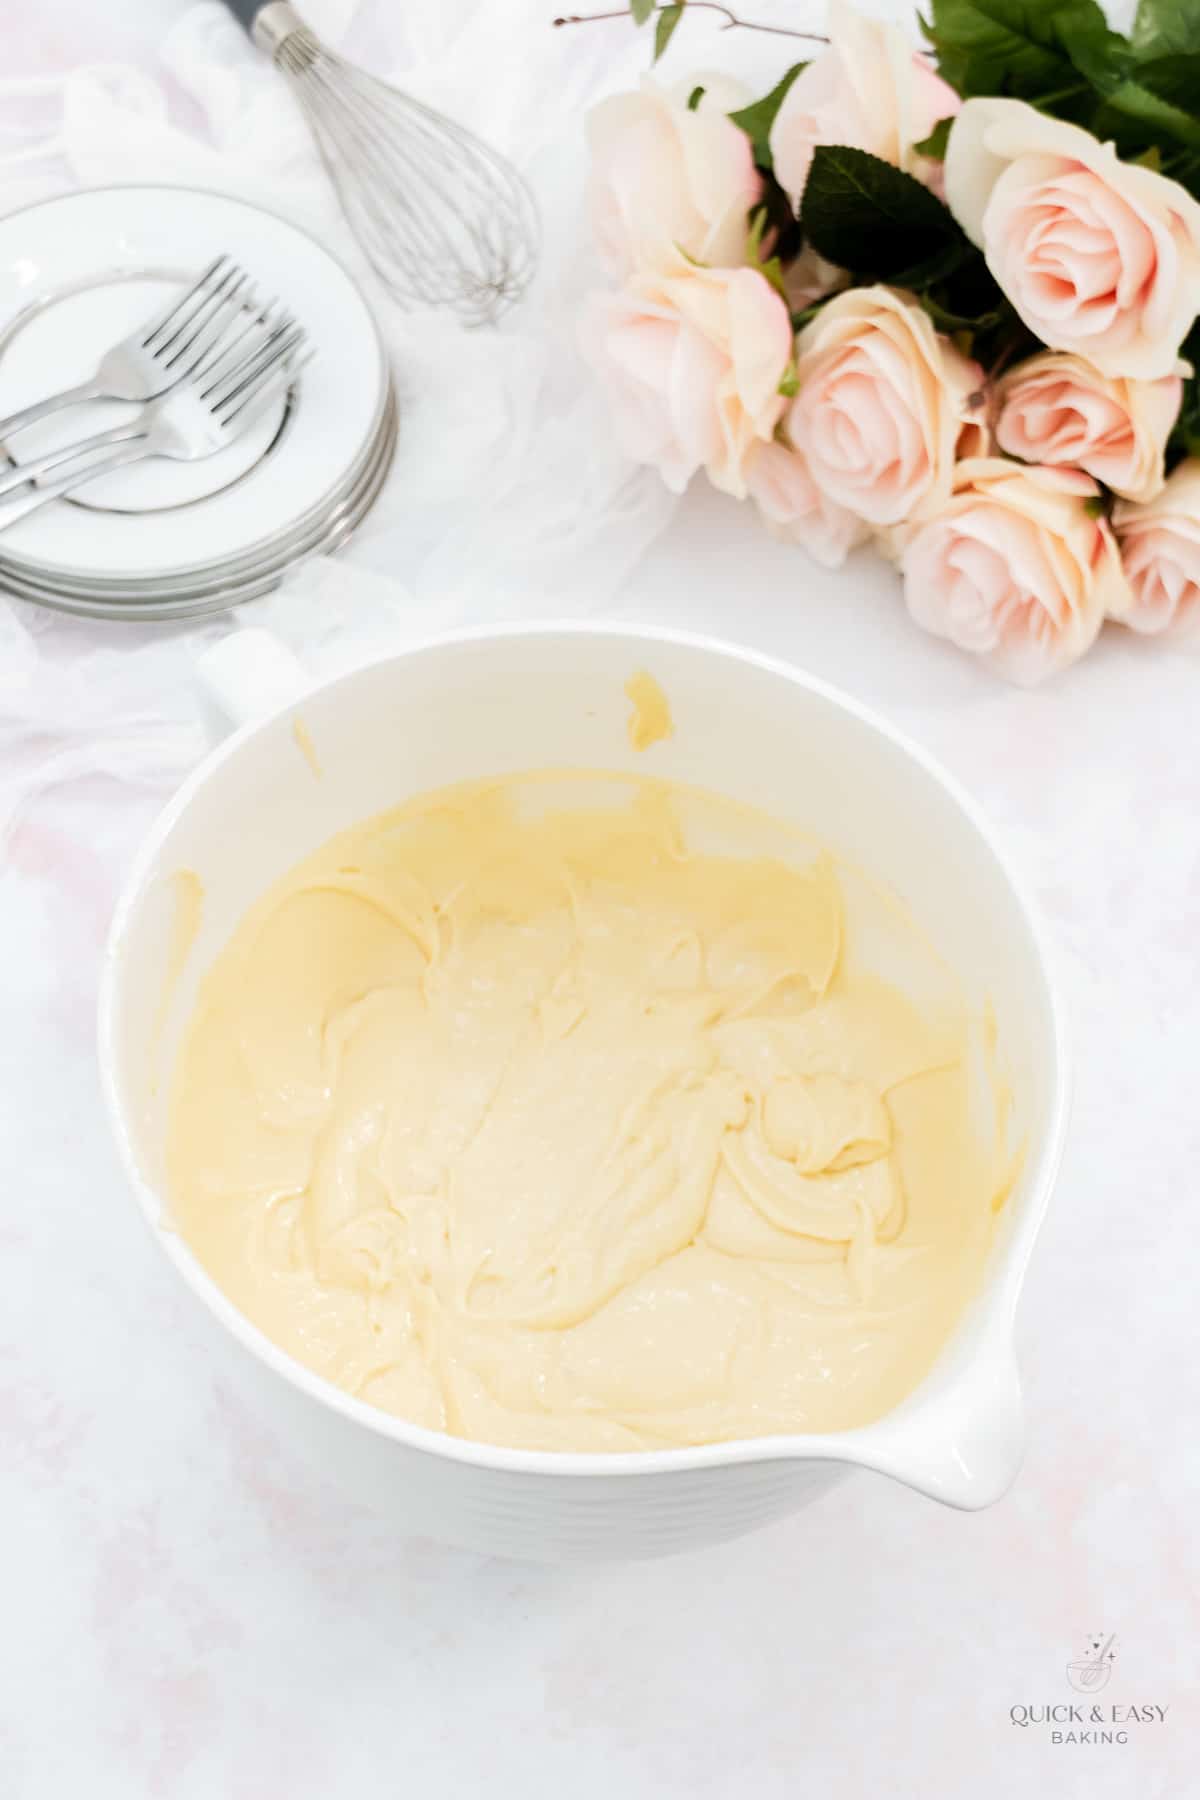 Cake batter mixed in a large white bowl.